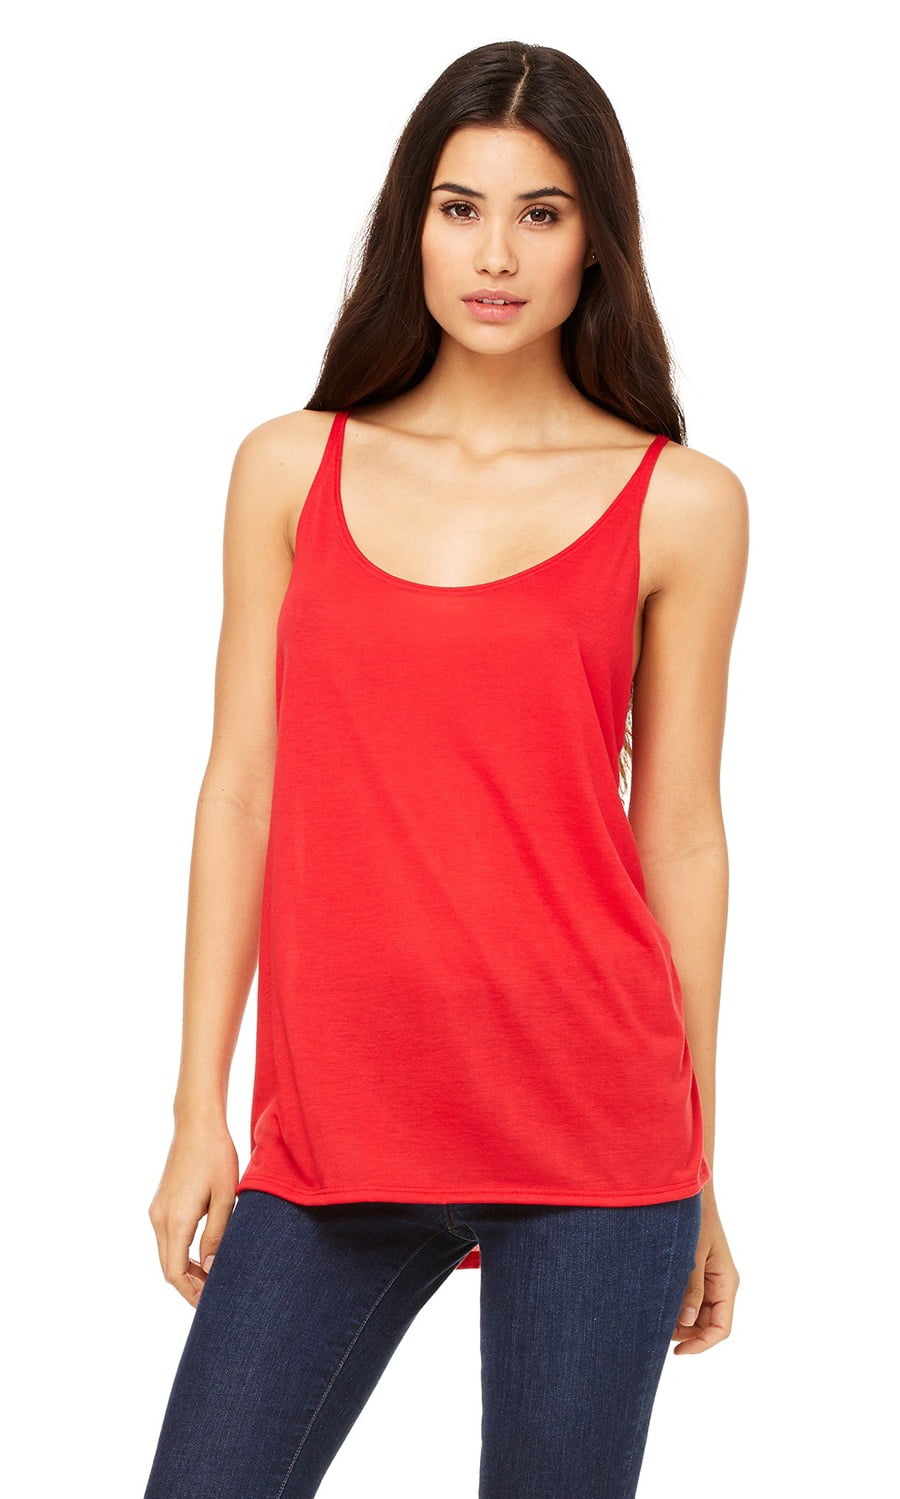 BELLA+CANVAS - The Bella + Canvas Ladies Slouchy Tank Top - RED - S ...